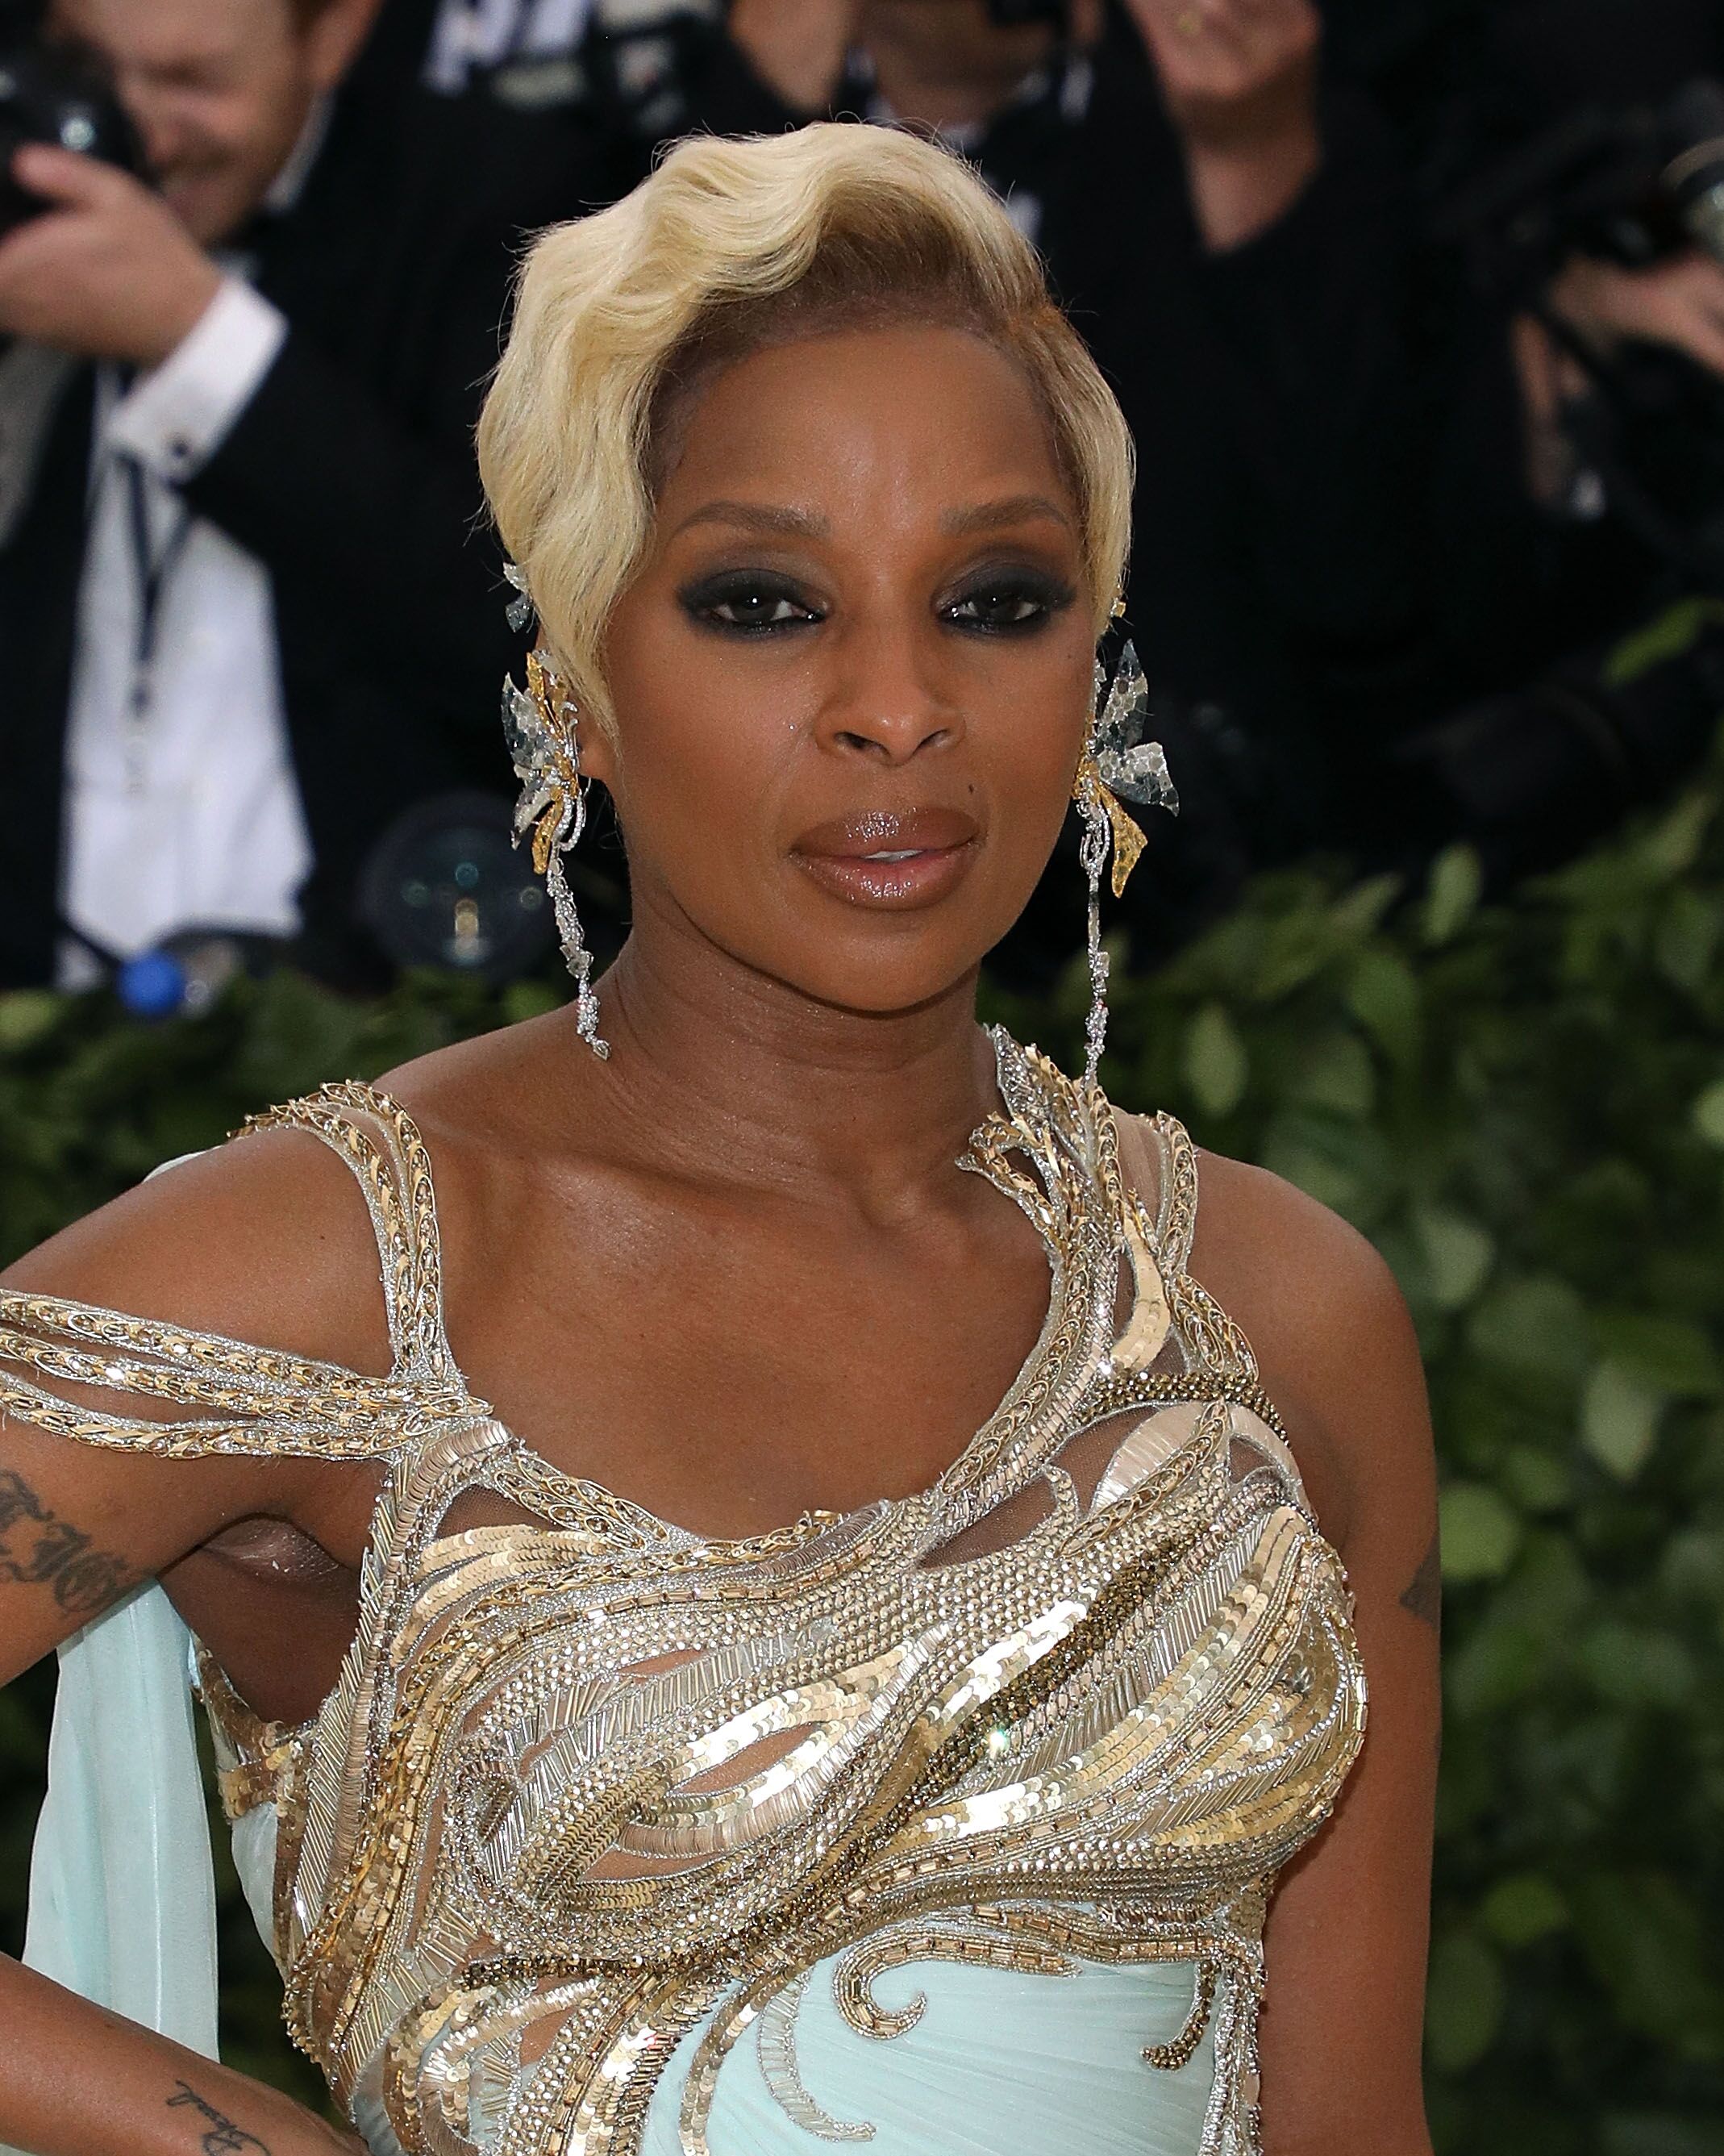 Mary J Blige Stuns With Her Snatched Body And Tattoos In Skimpy White Outfit For Self Magazine